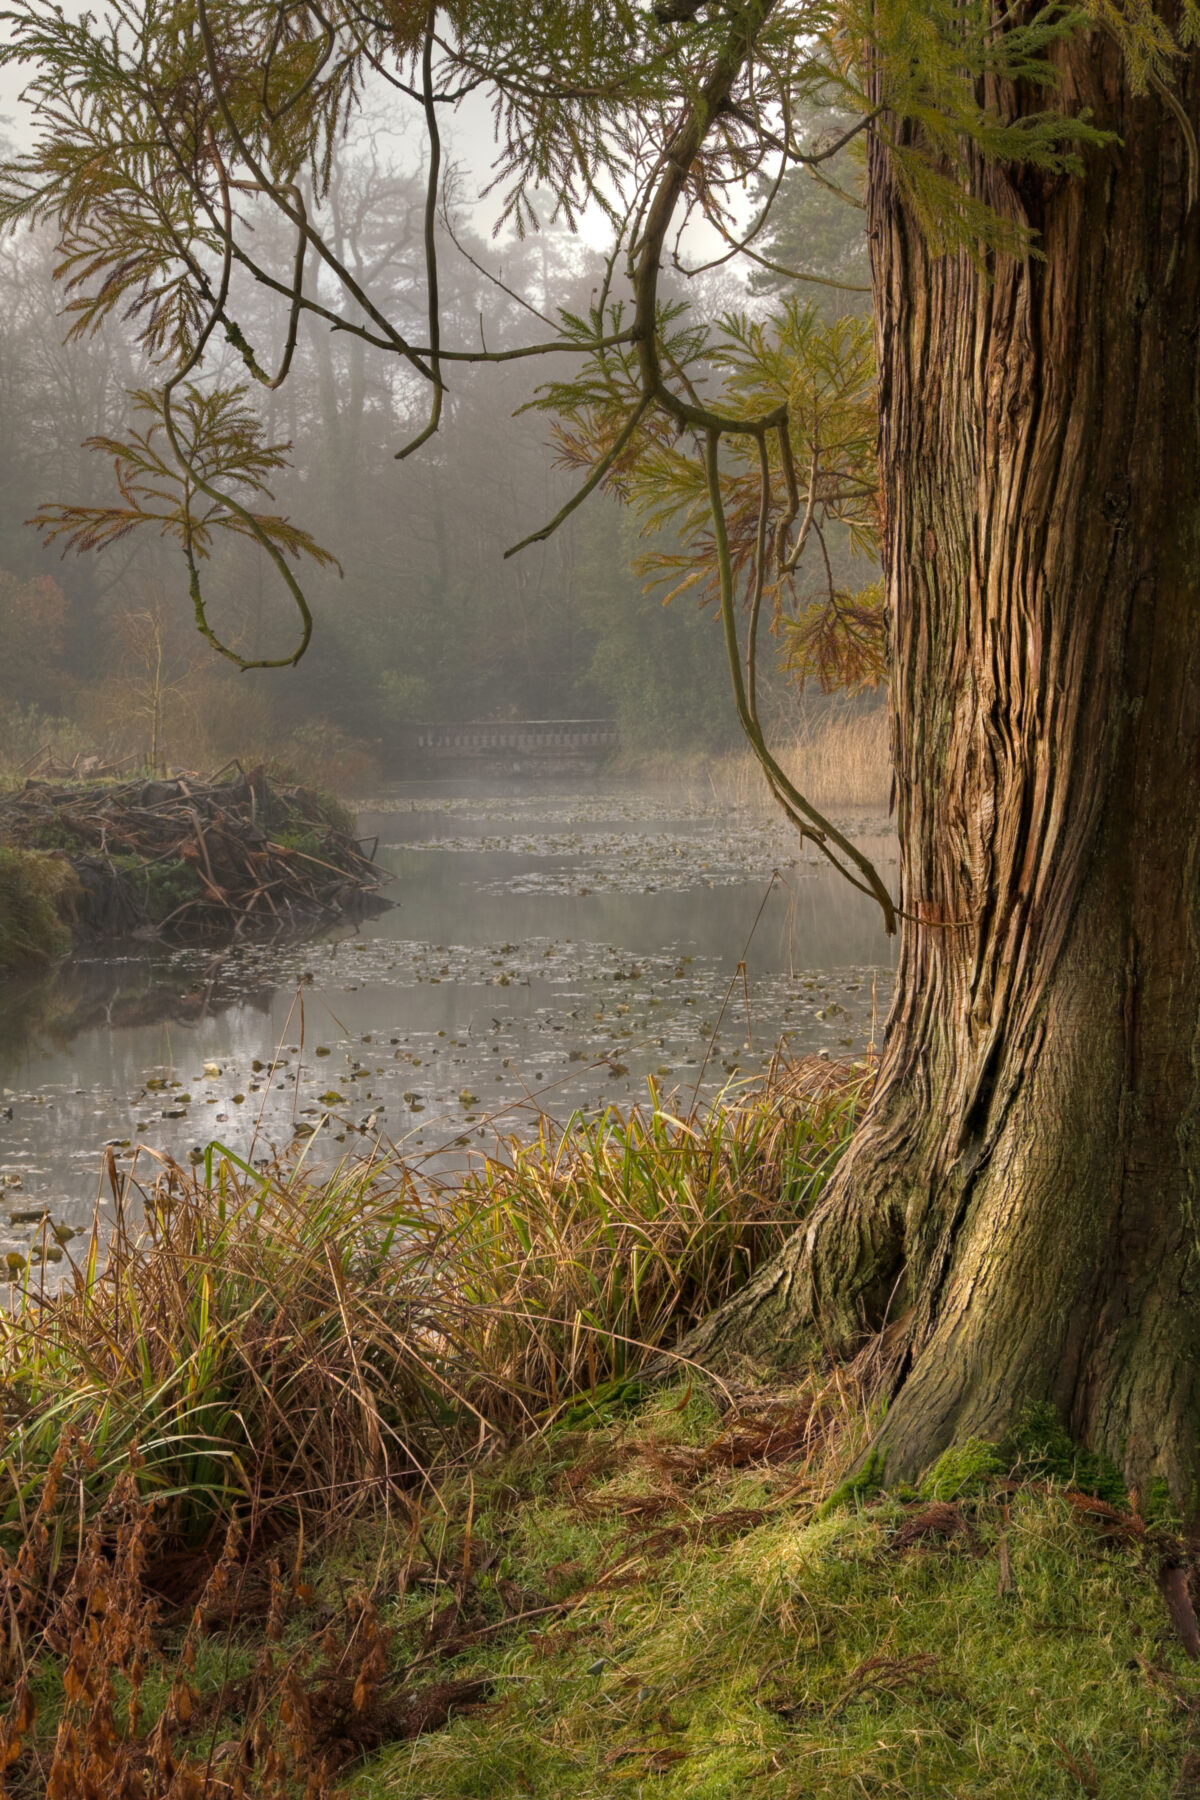 Tree in Fota Arboretum and Gardens with misty background